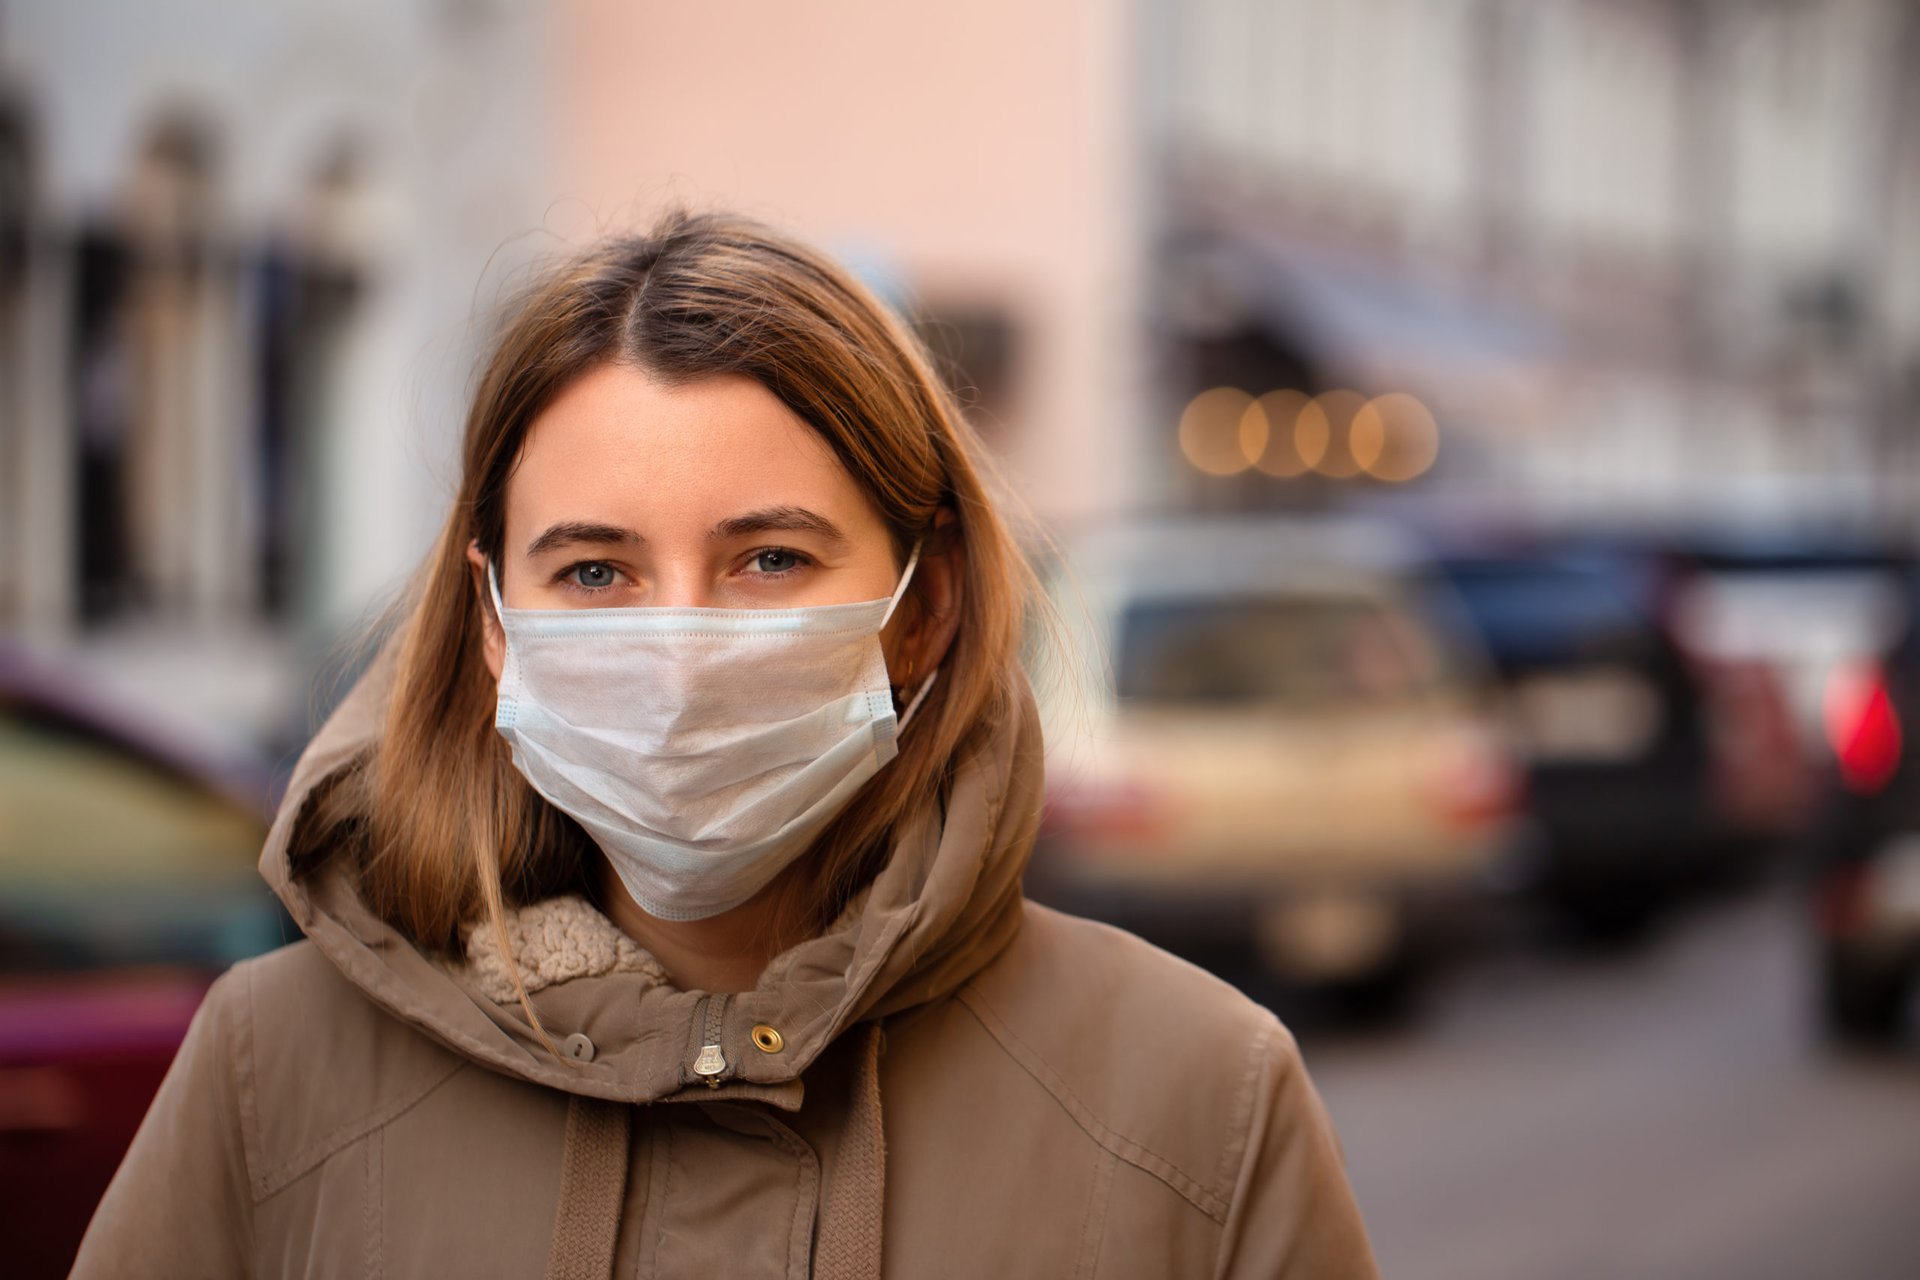 How Long Will We All Need to Wear Masks?